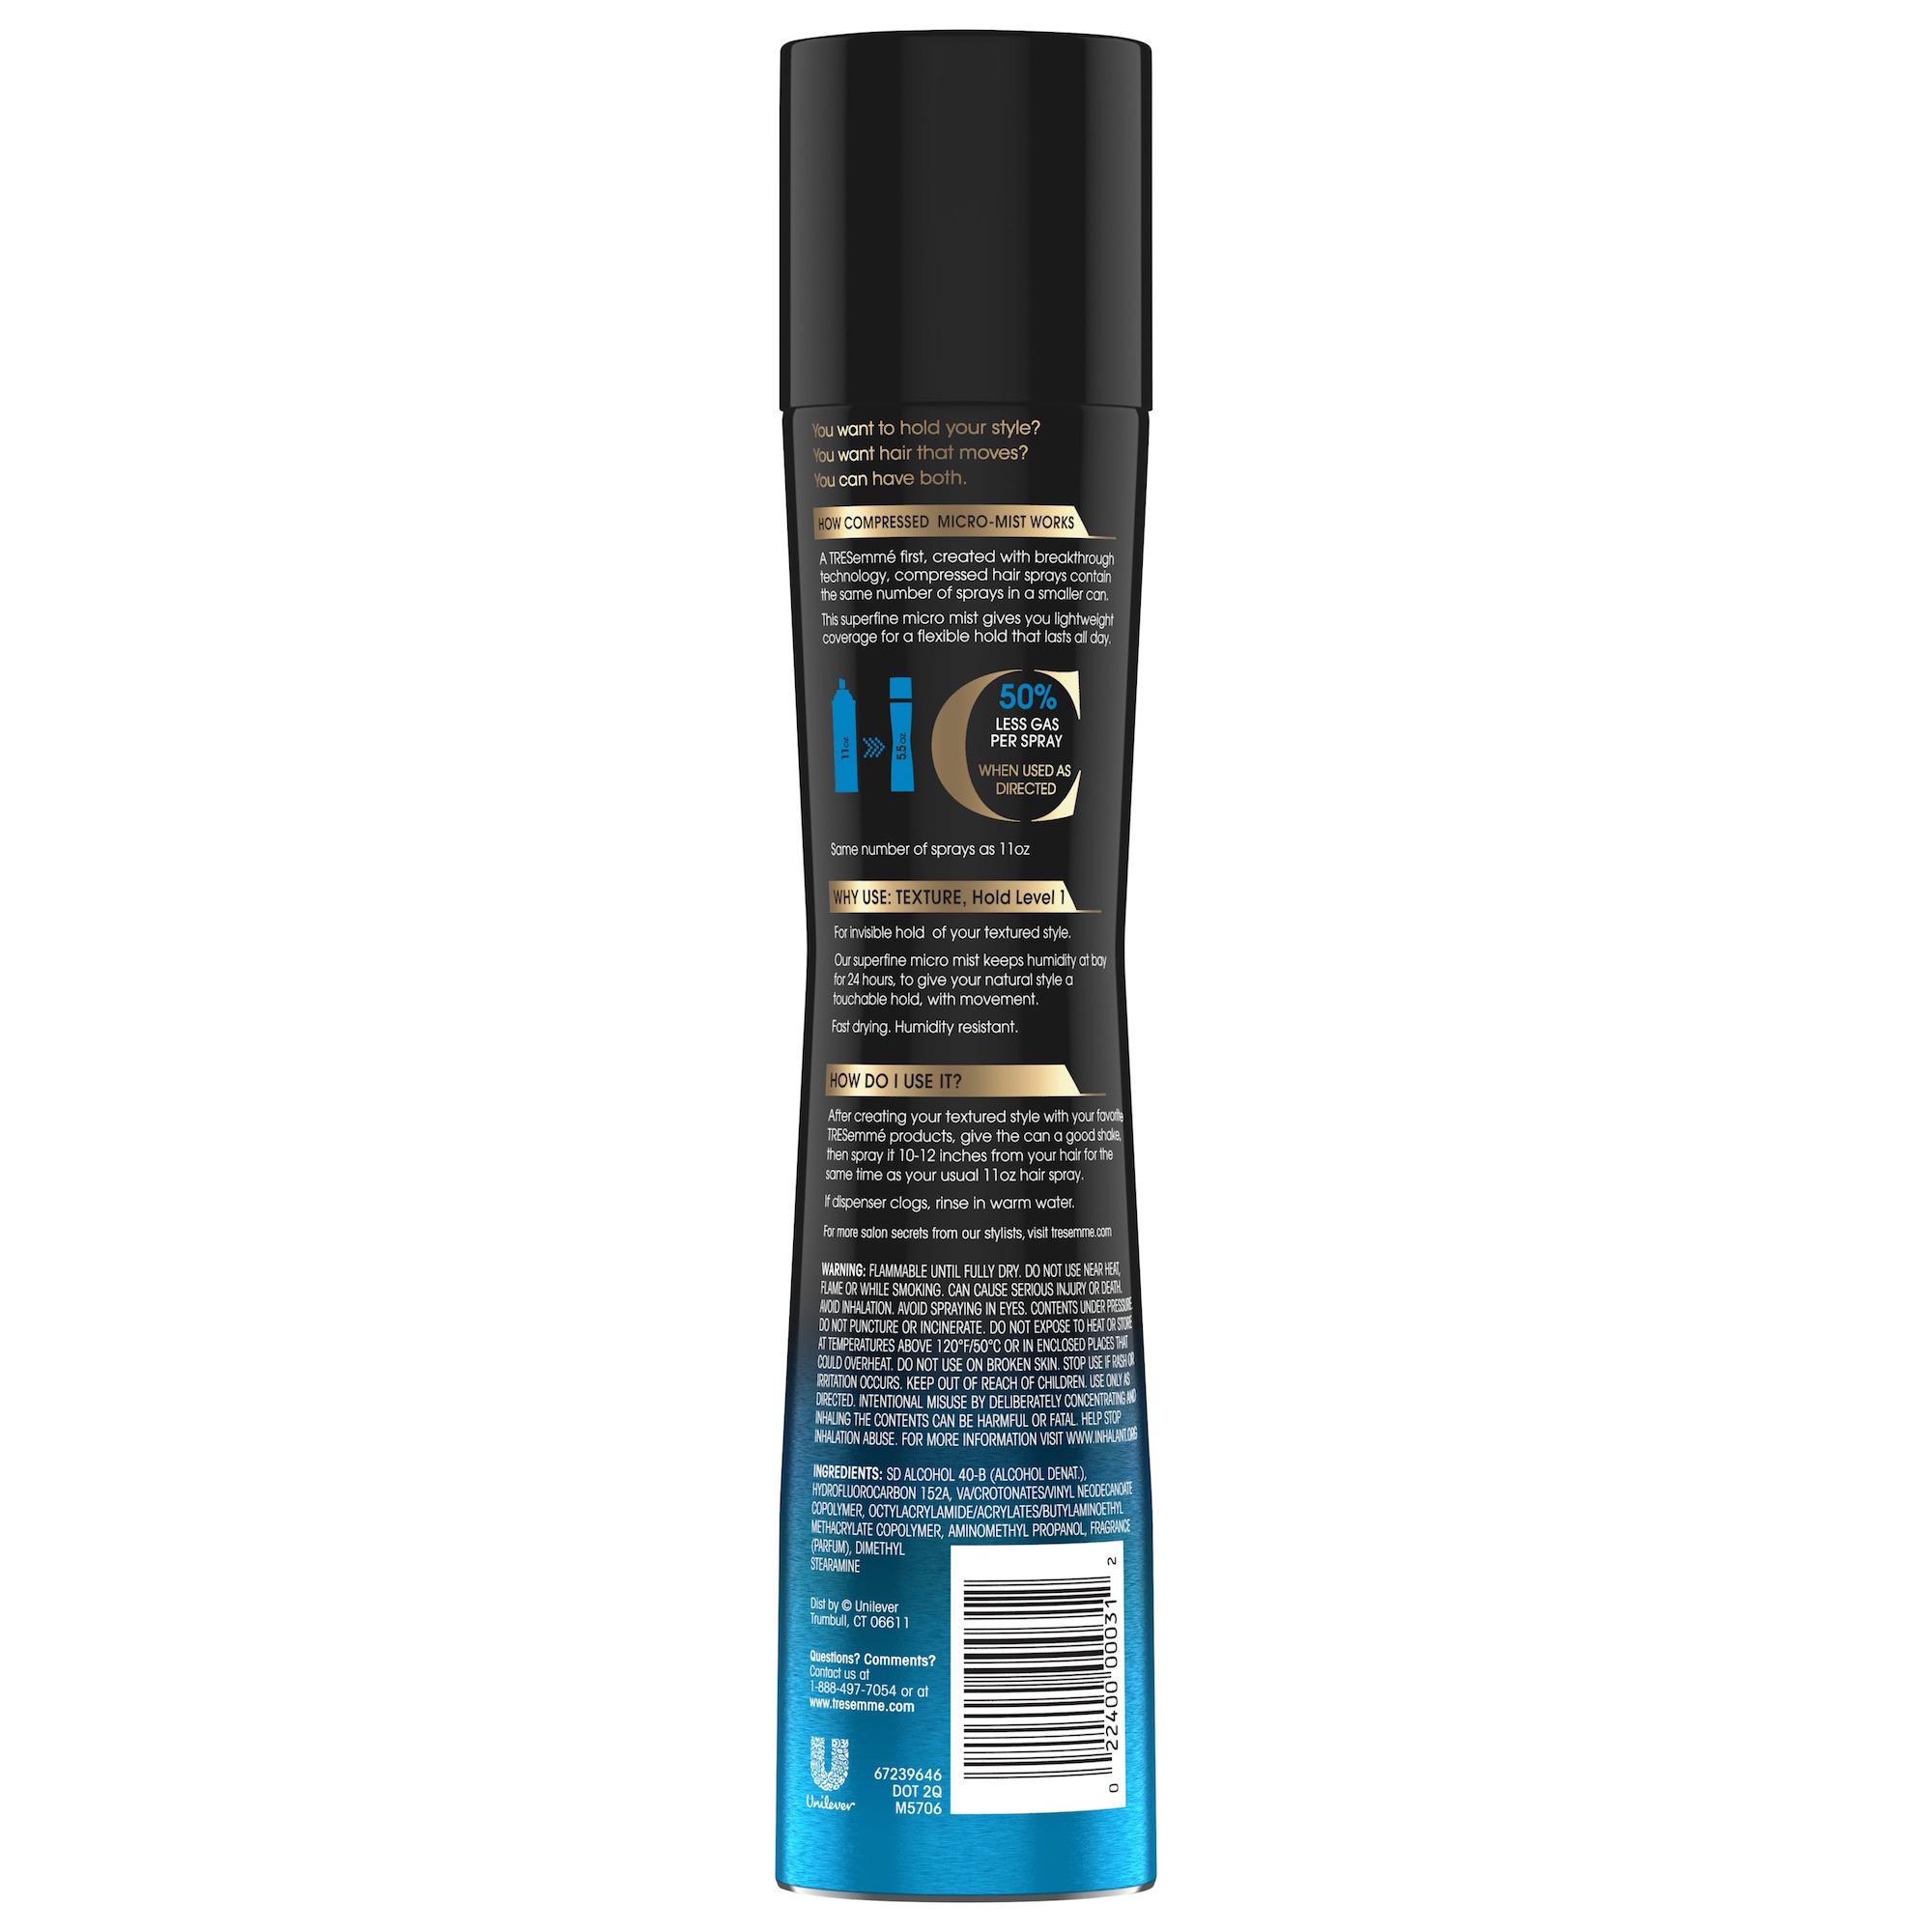 Tresemme Compressed Micro Mist Flexible Hold Hairspray Texture Hold Level 1 5.5 oz - image 2 of 5